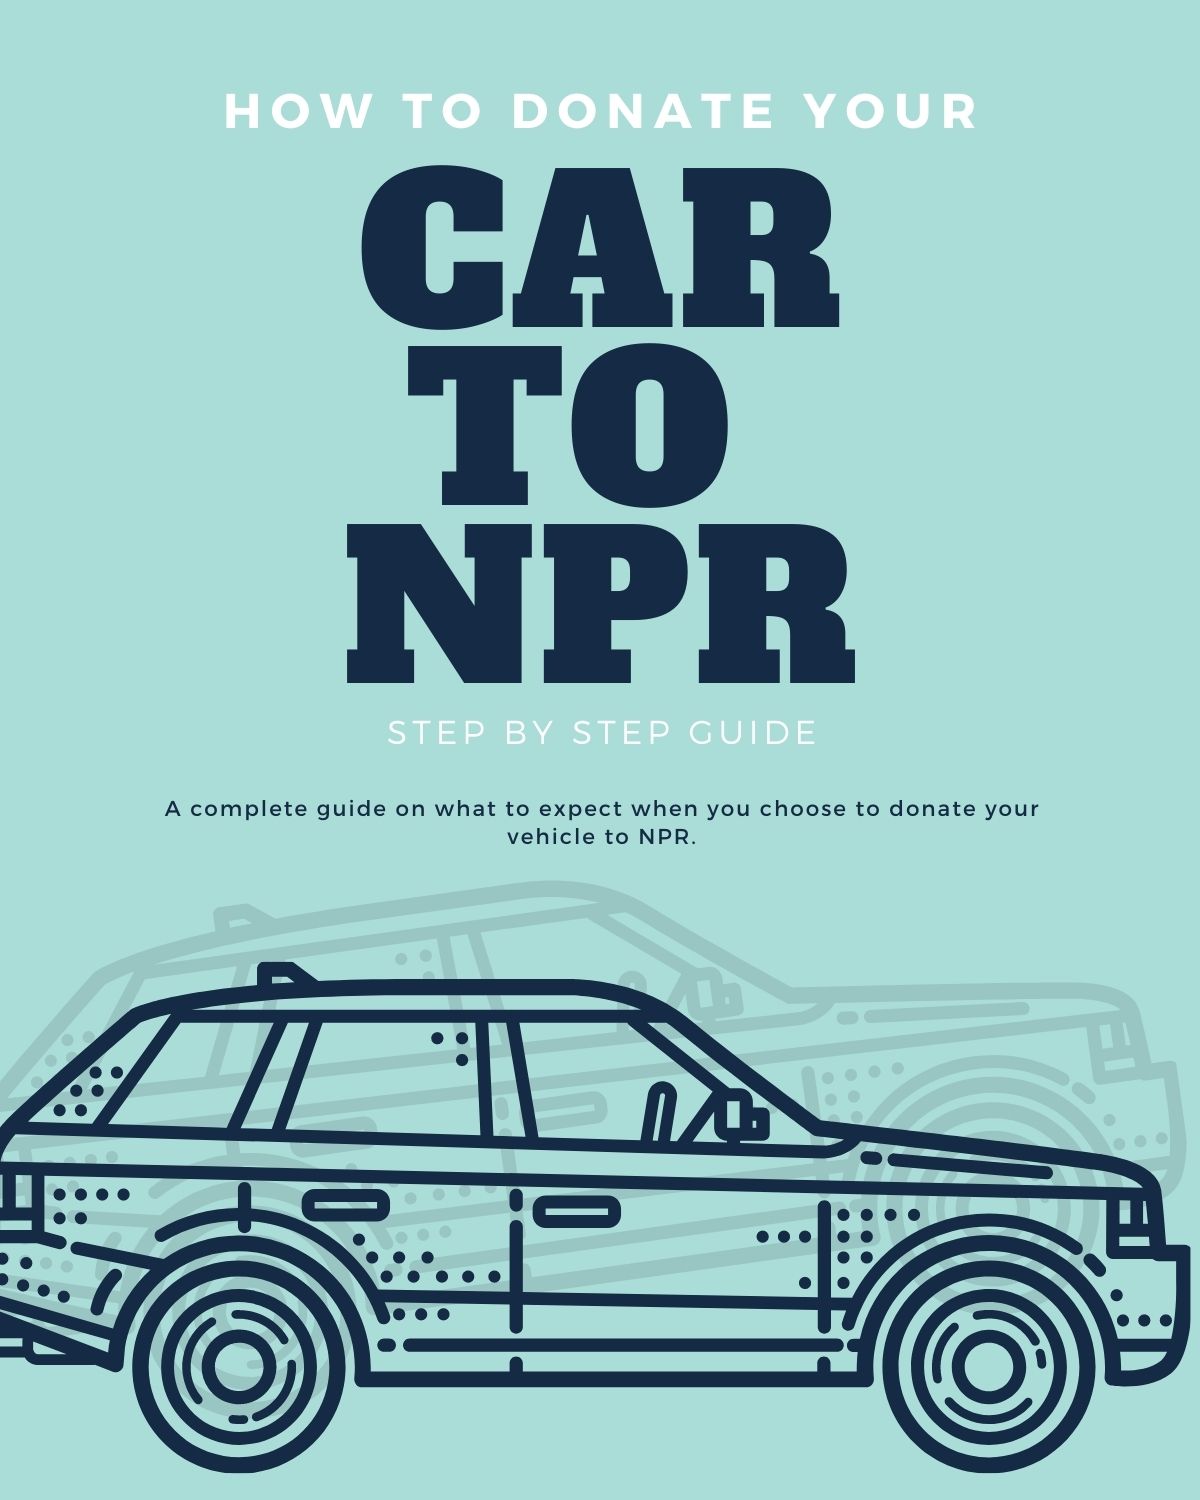 How to donate your car to NPR